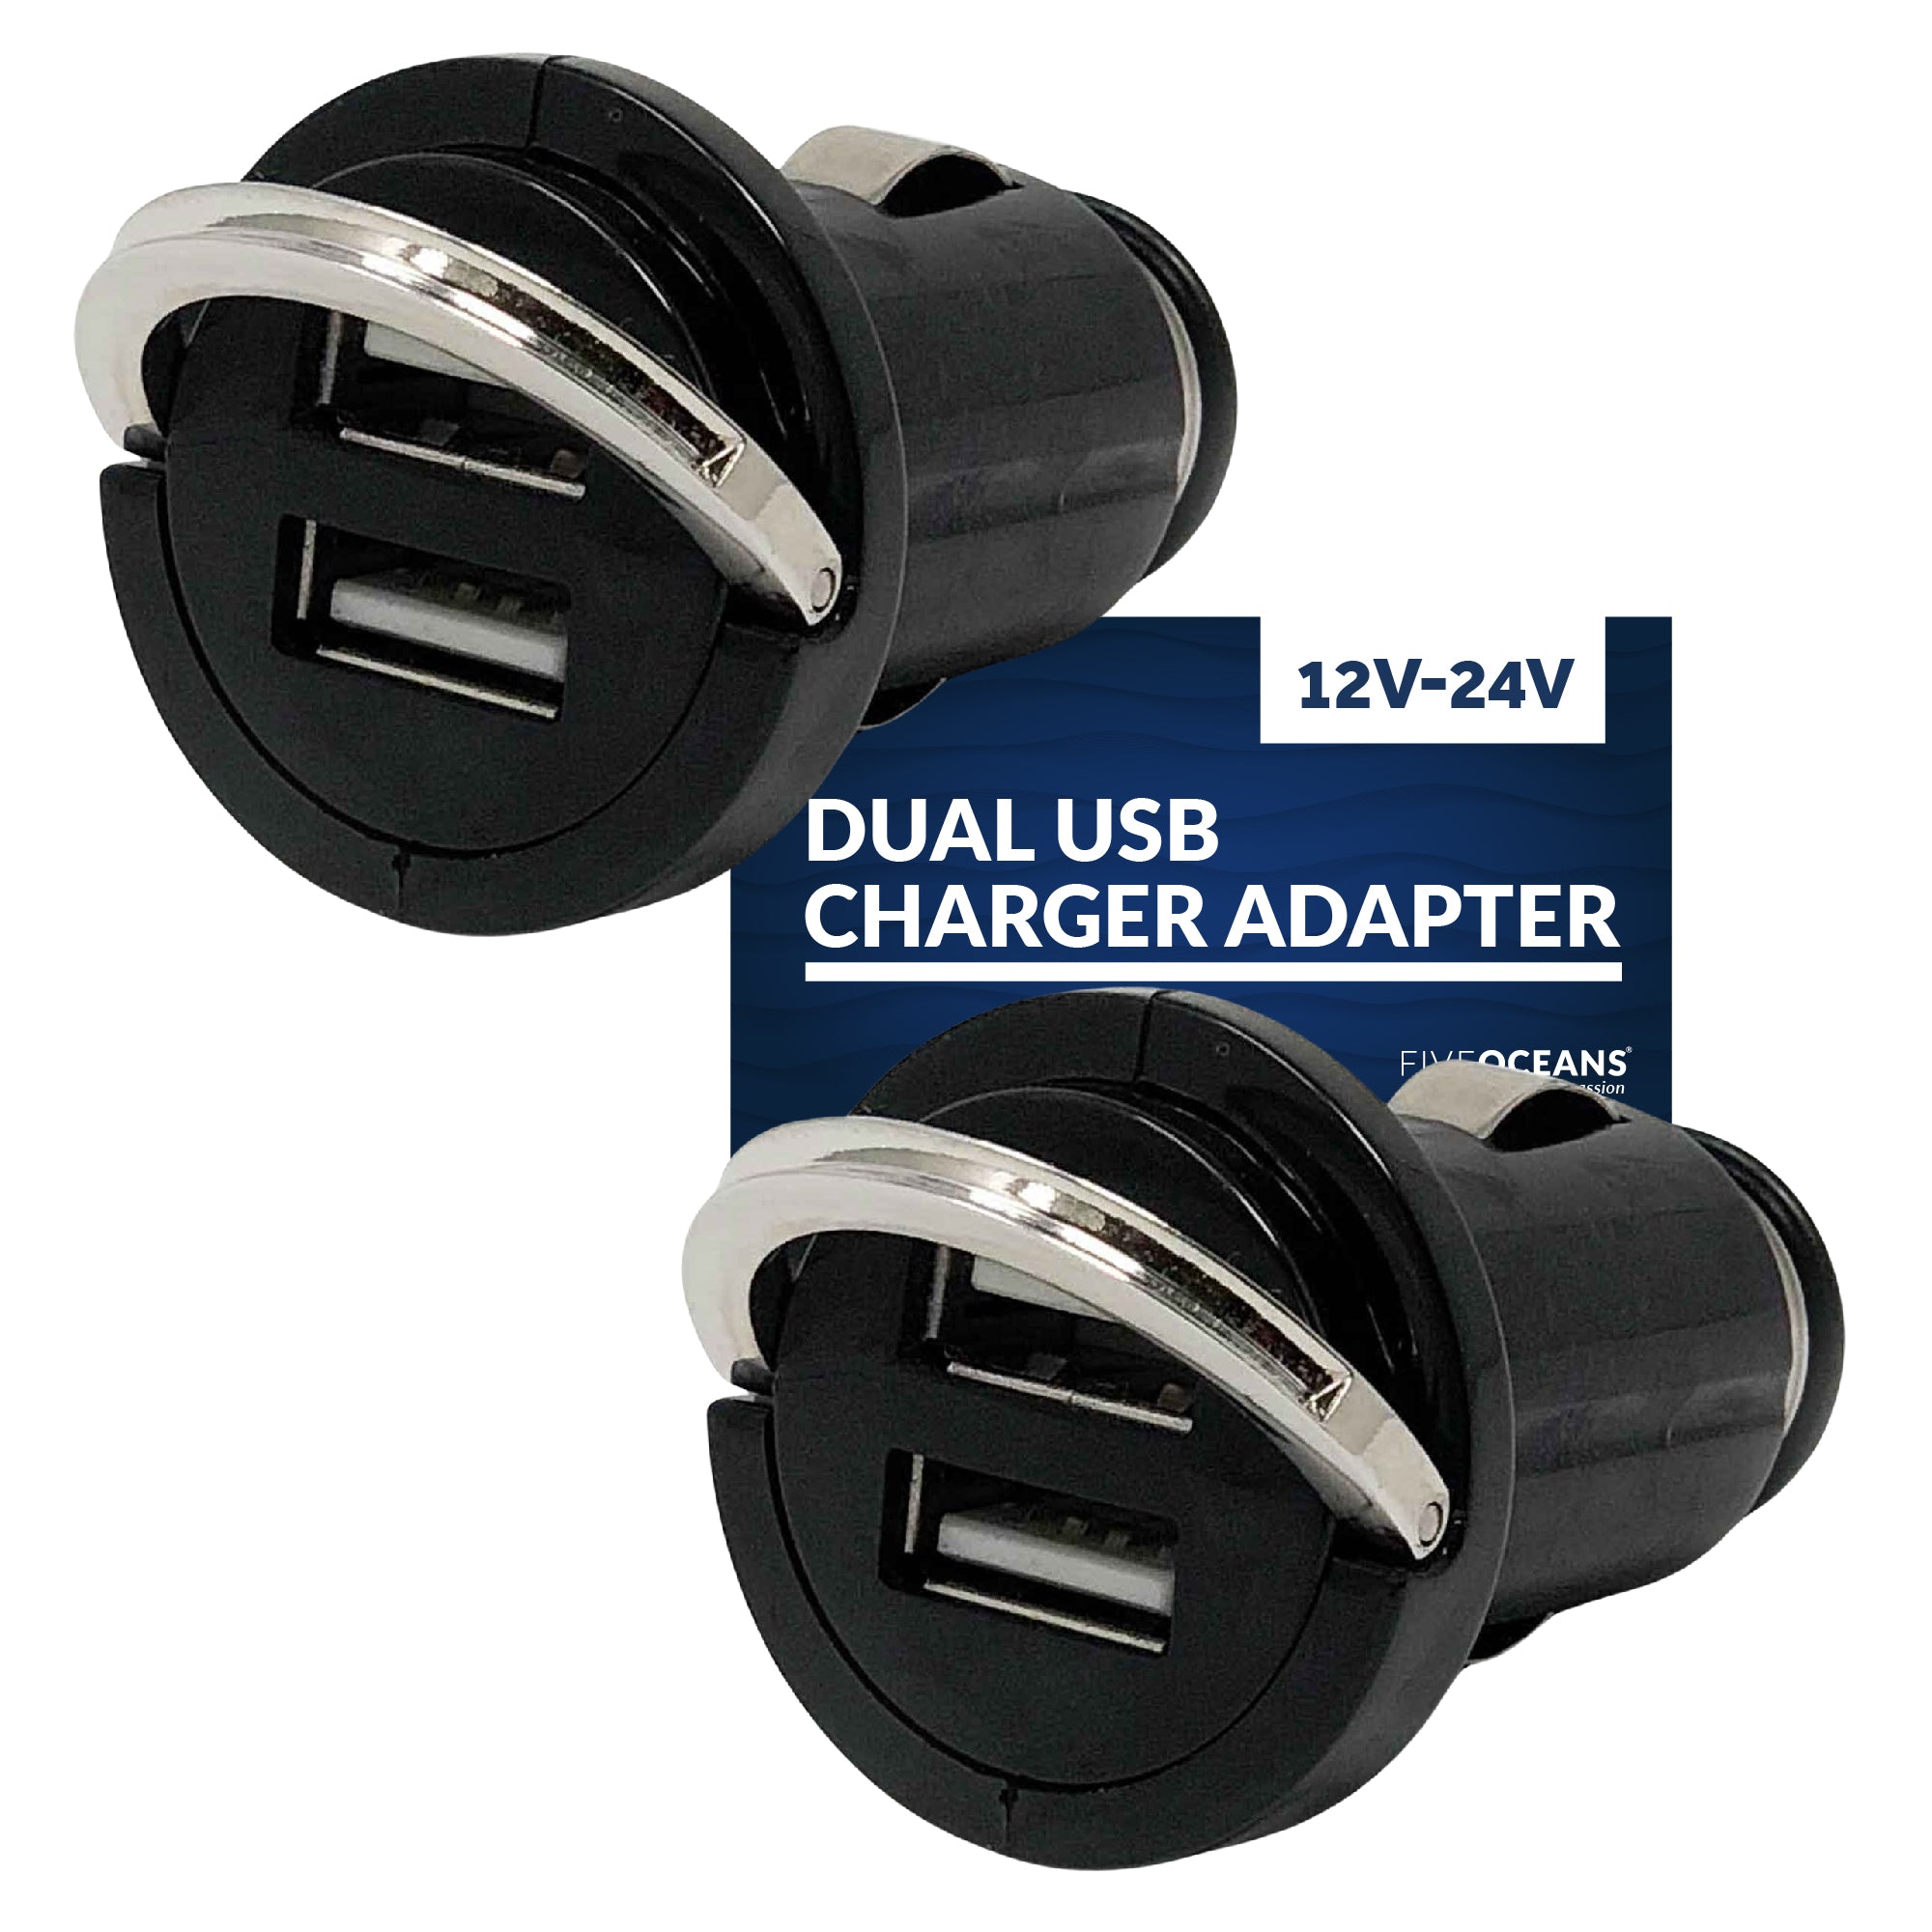 Dual USB Charger Adapter, 12V-24 V, 2-Pack - FO3735-M2